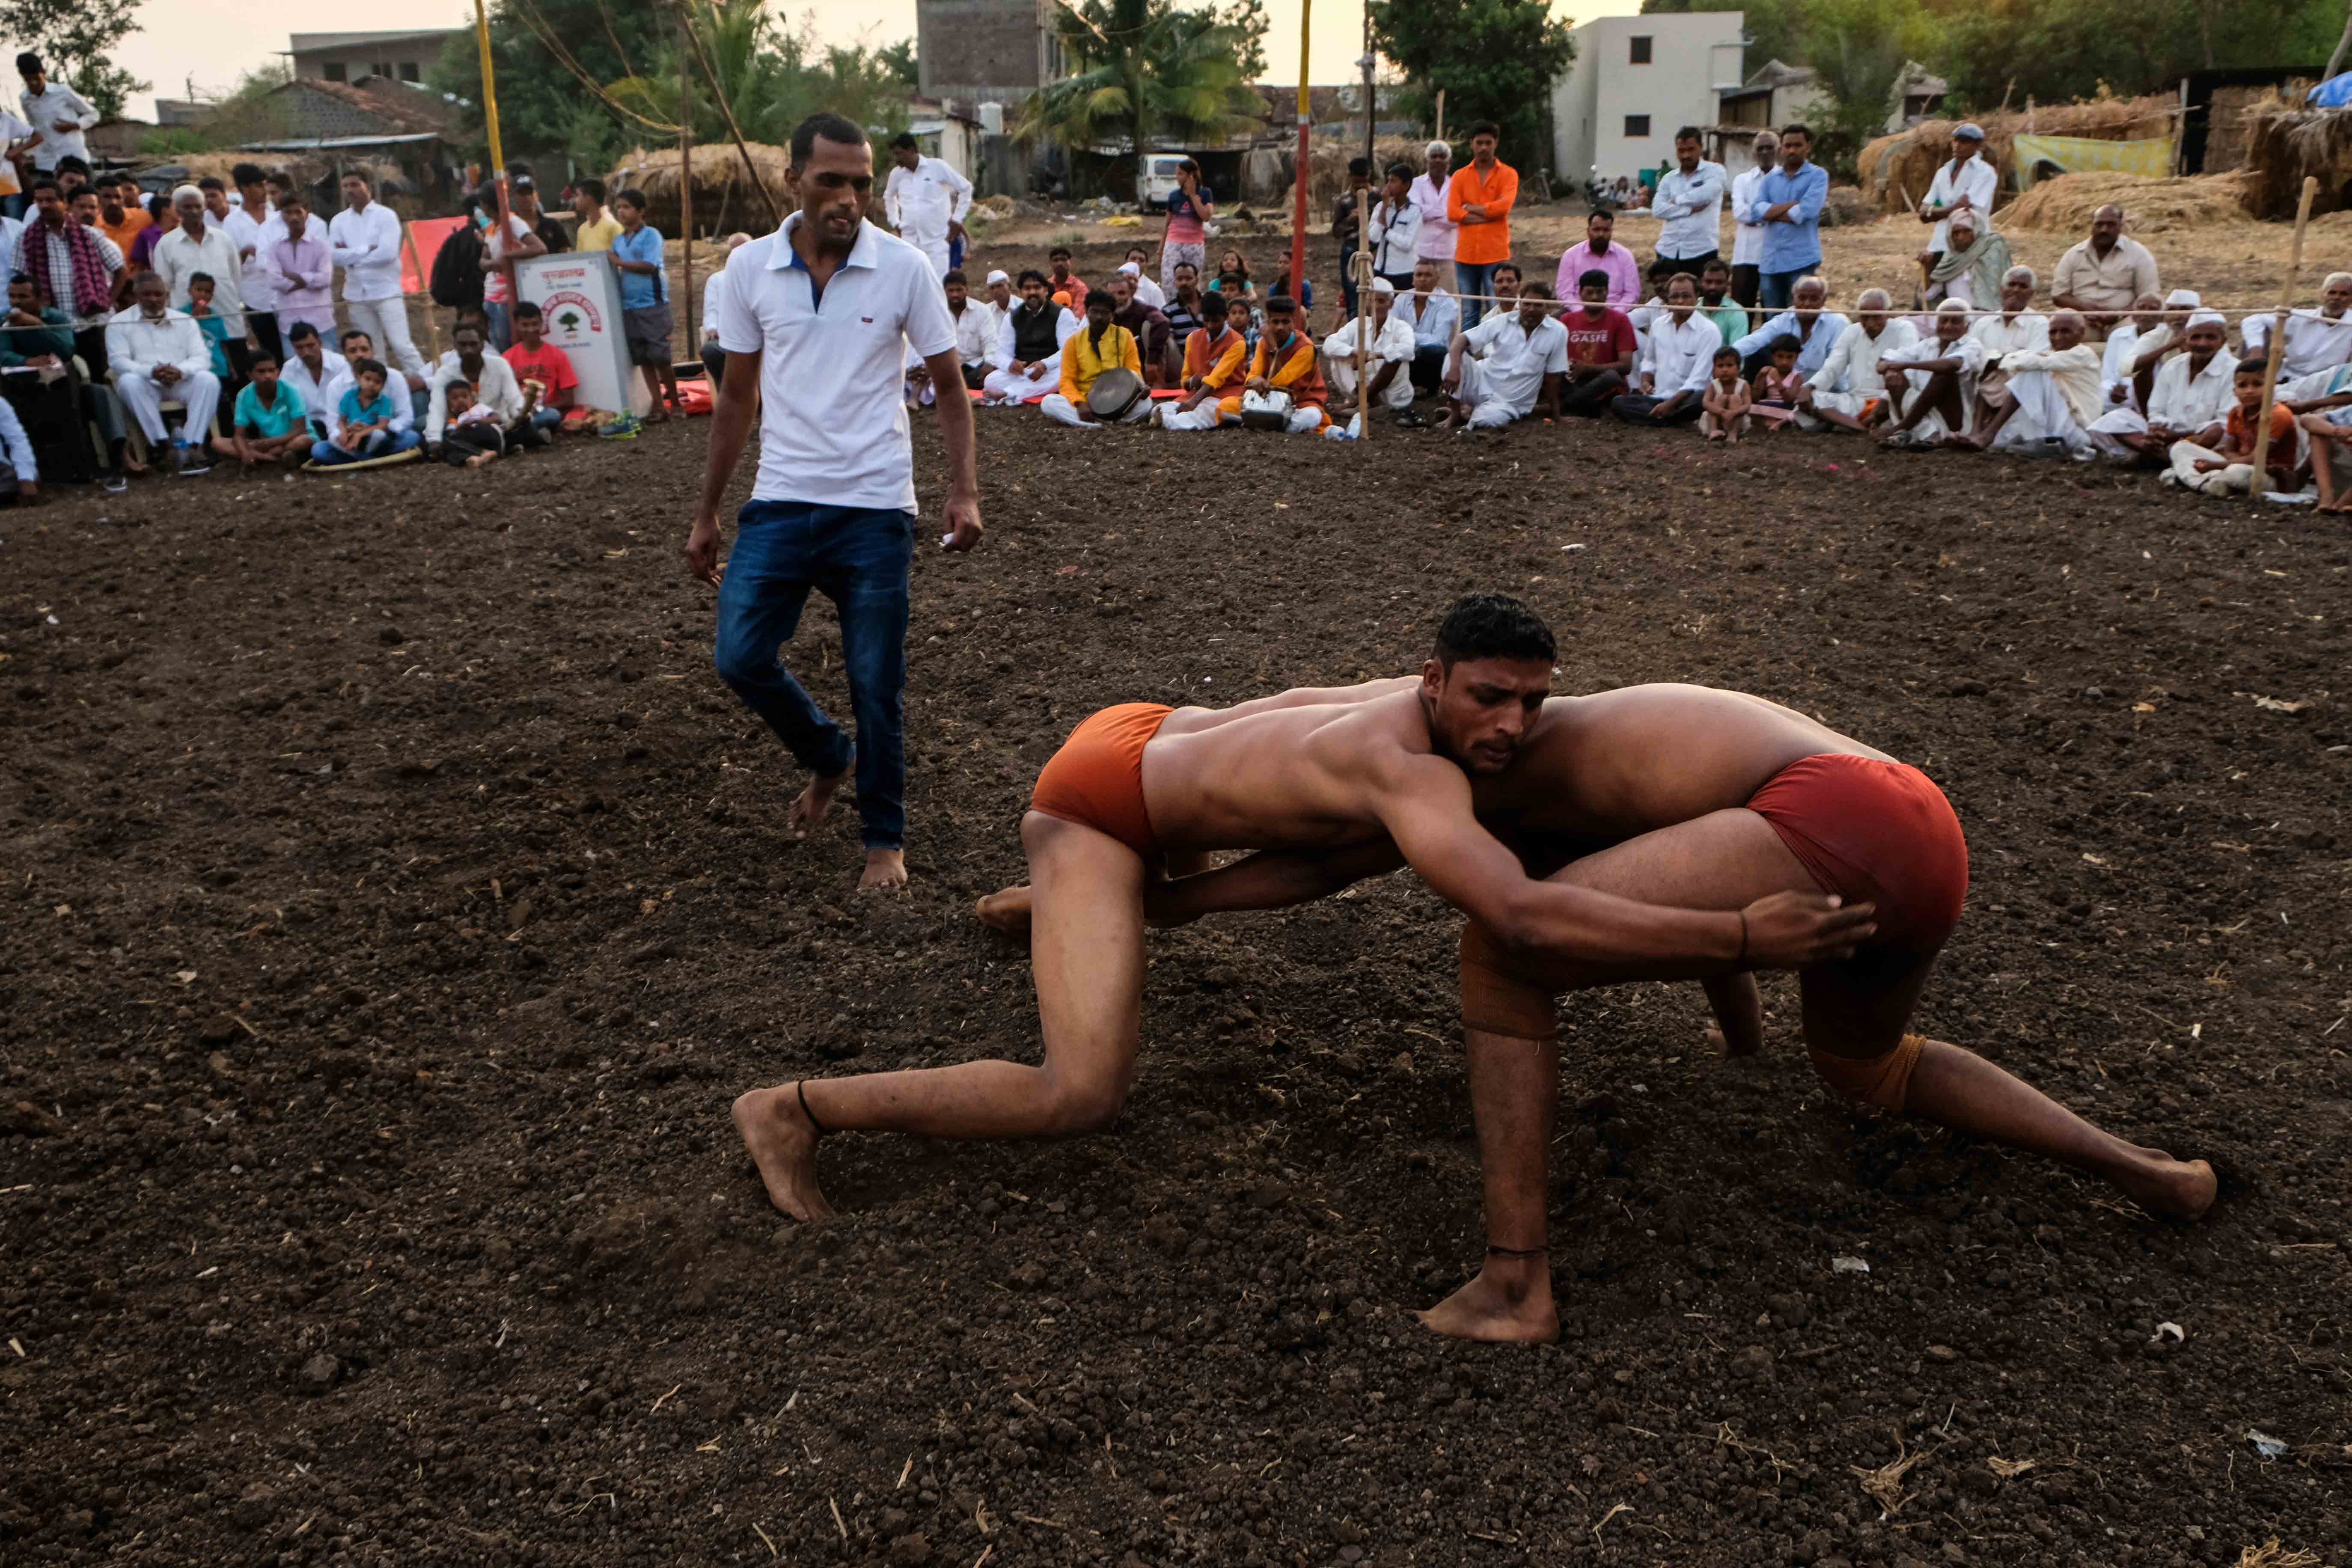 Intense moment from a fight held in Savade village of Satara district in Maharashtra. Grapplers struggle to grasp their opponent and pin them down to score a point. Unlike international or national tournaments, there is no restriction of time at the village-level tournaments and bouts can last long. Photograph by Indrajit Khambe ©Sahapedia